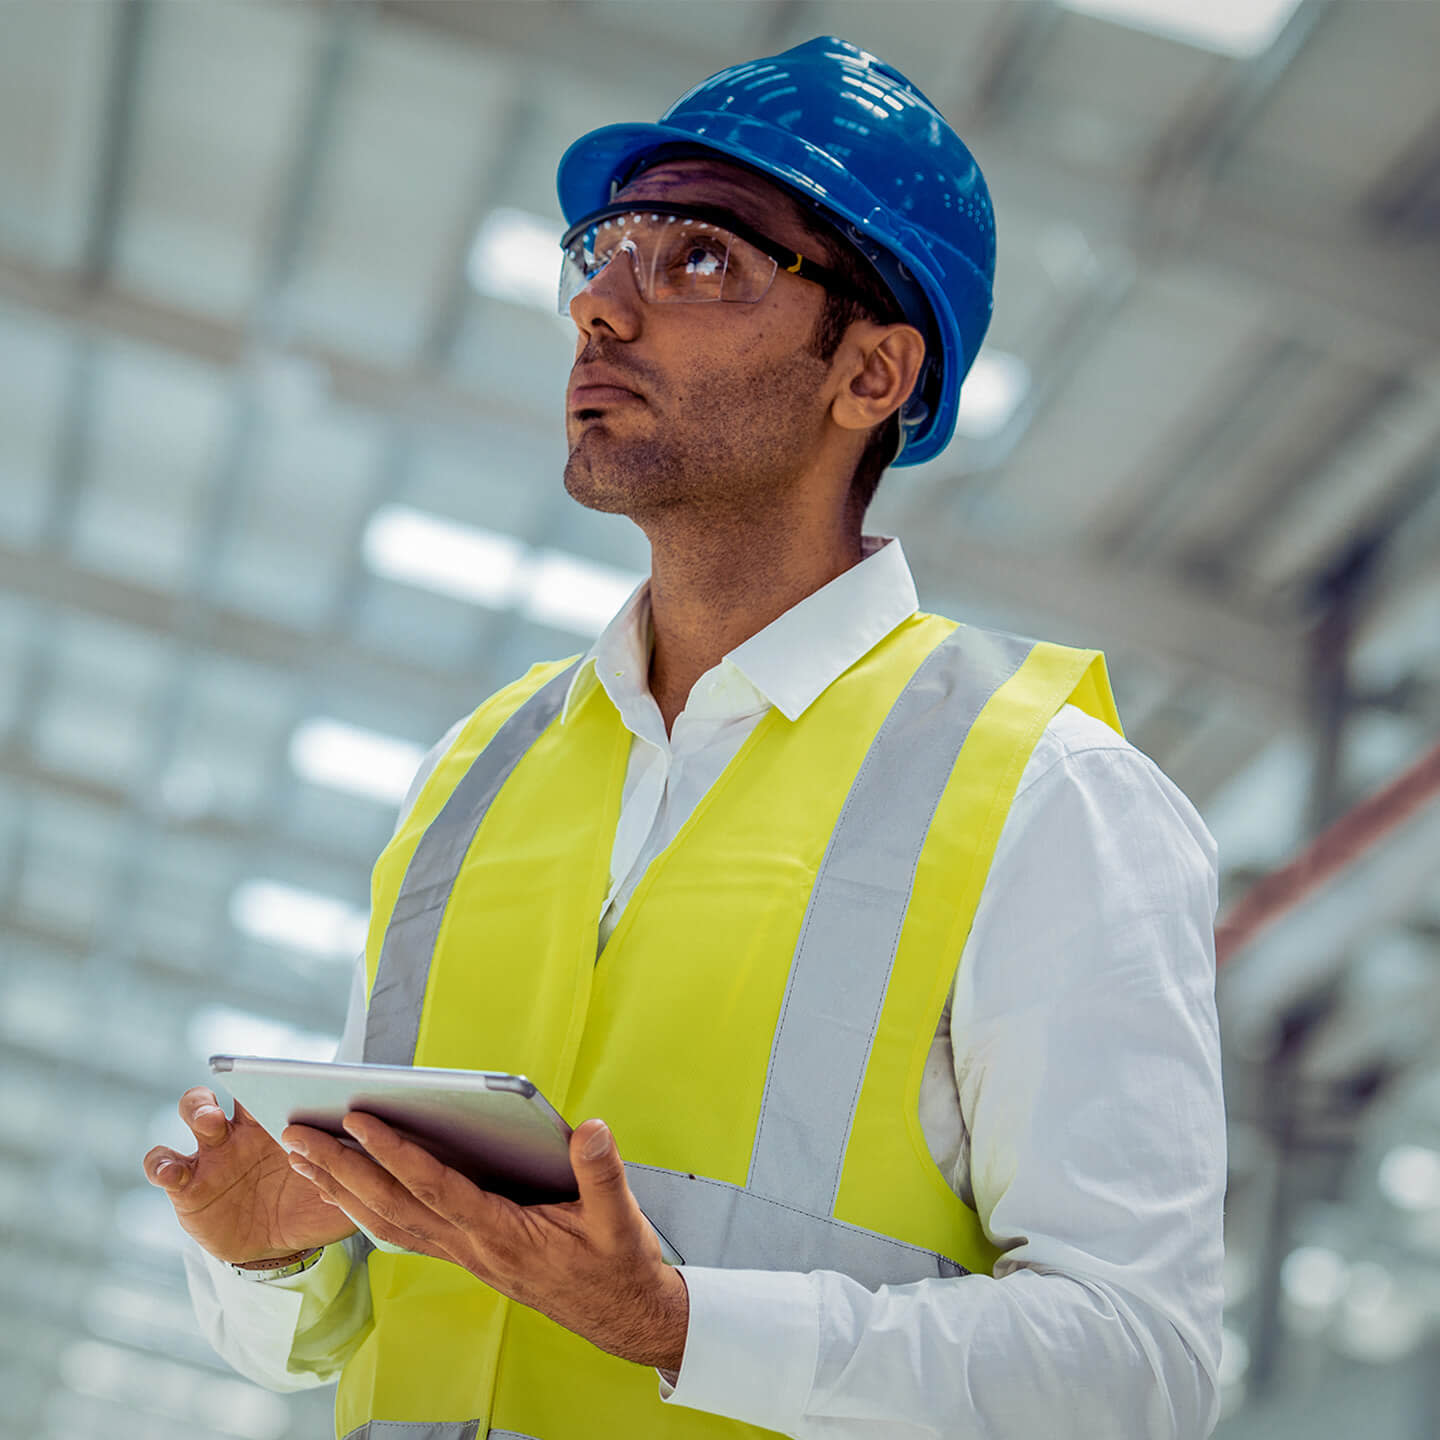 Contractor looking up while holding a tablet